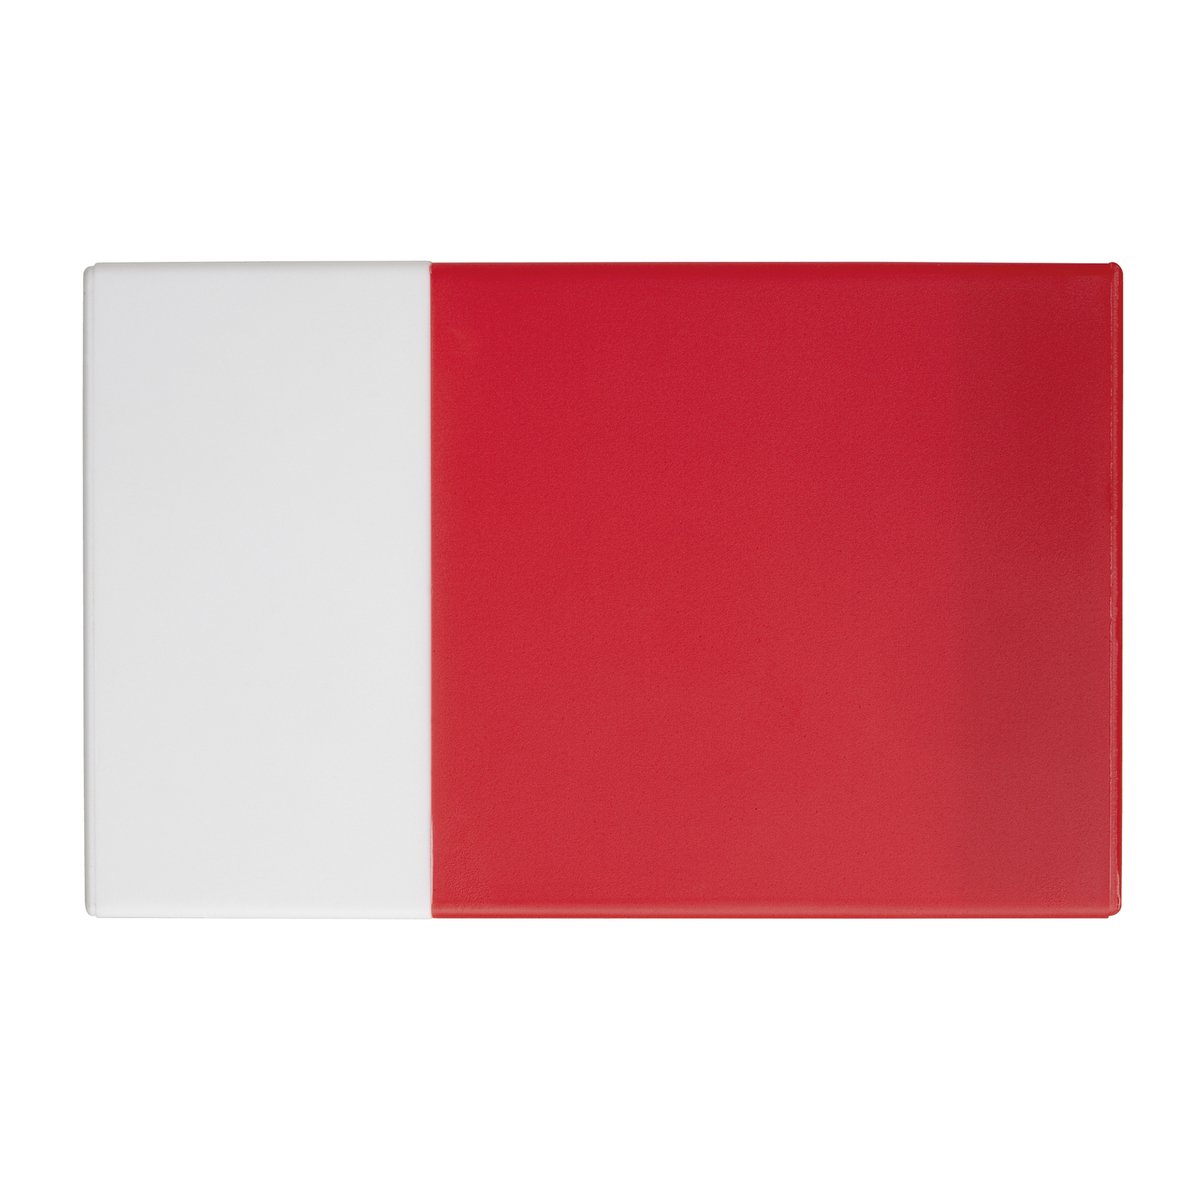 Credit and business card box REFLECTS-KELMIS white/red